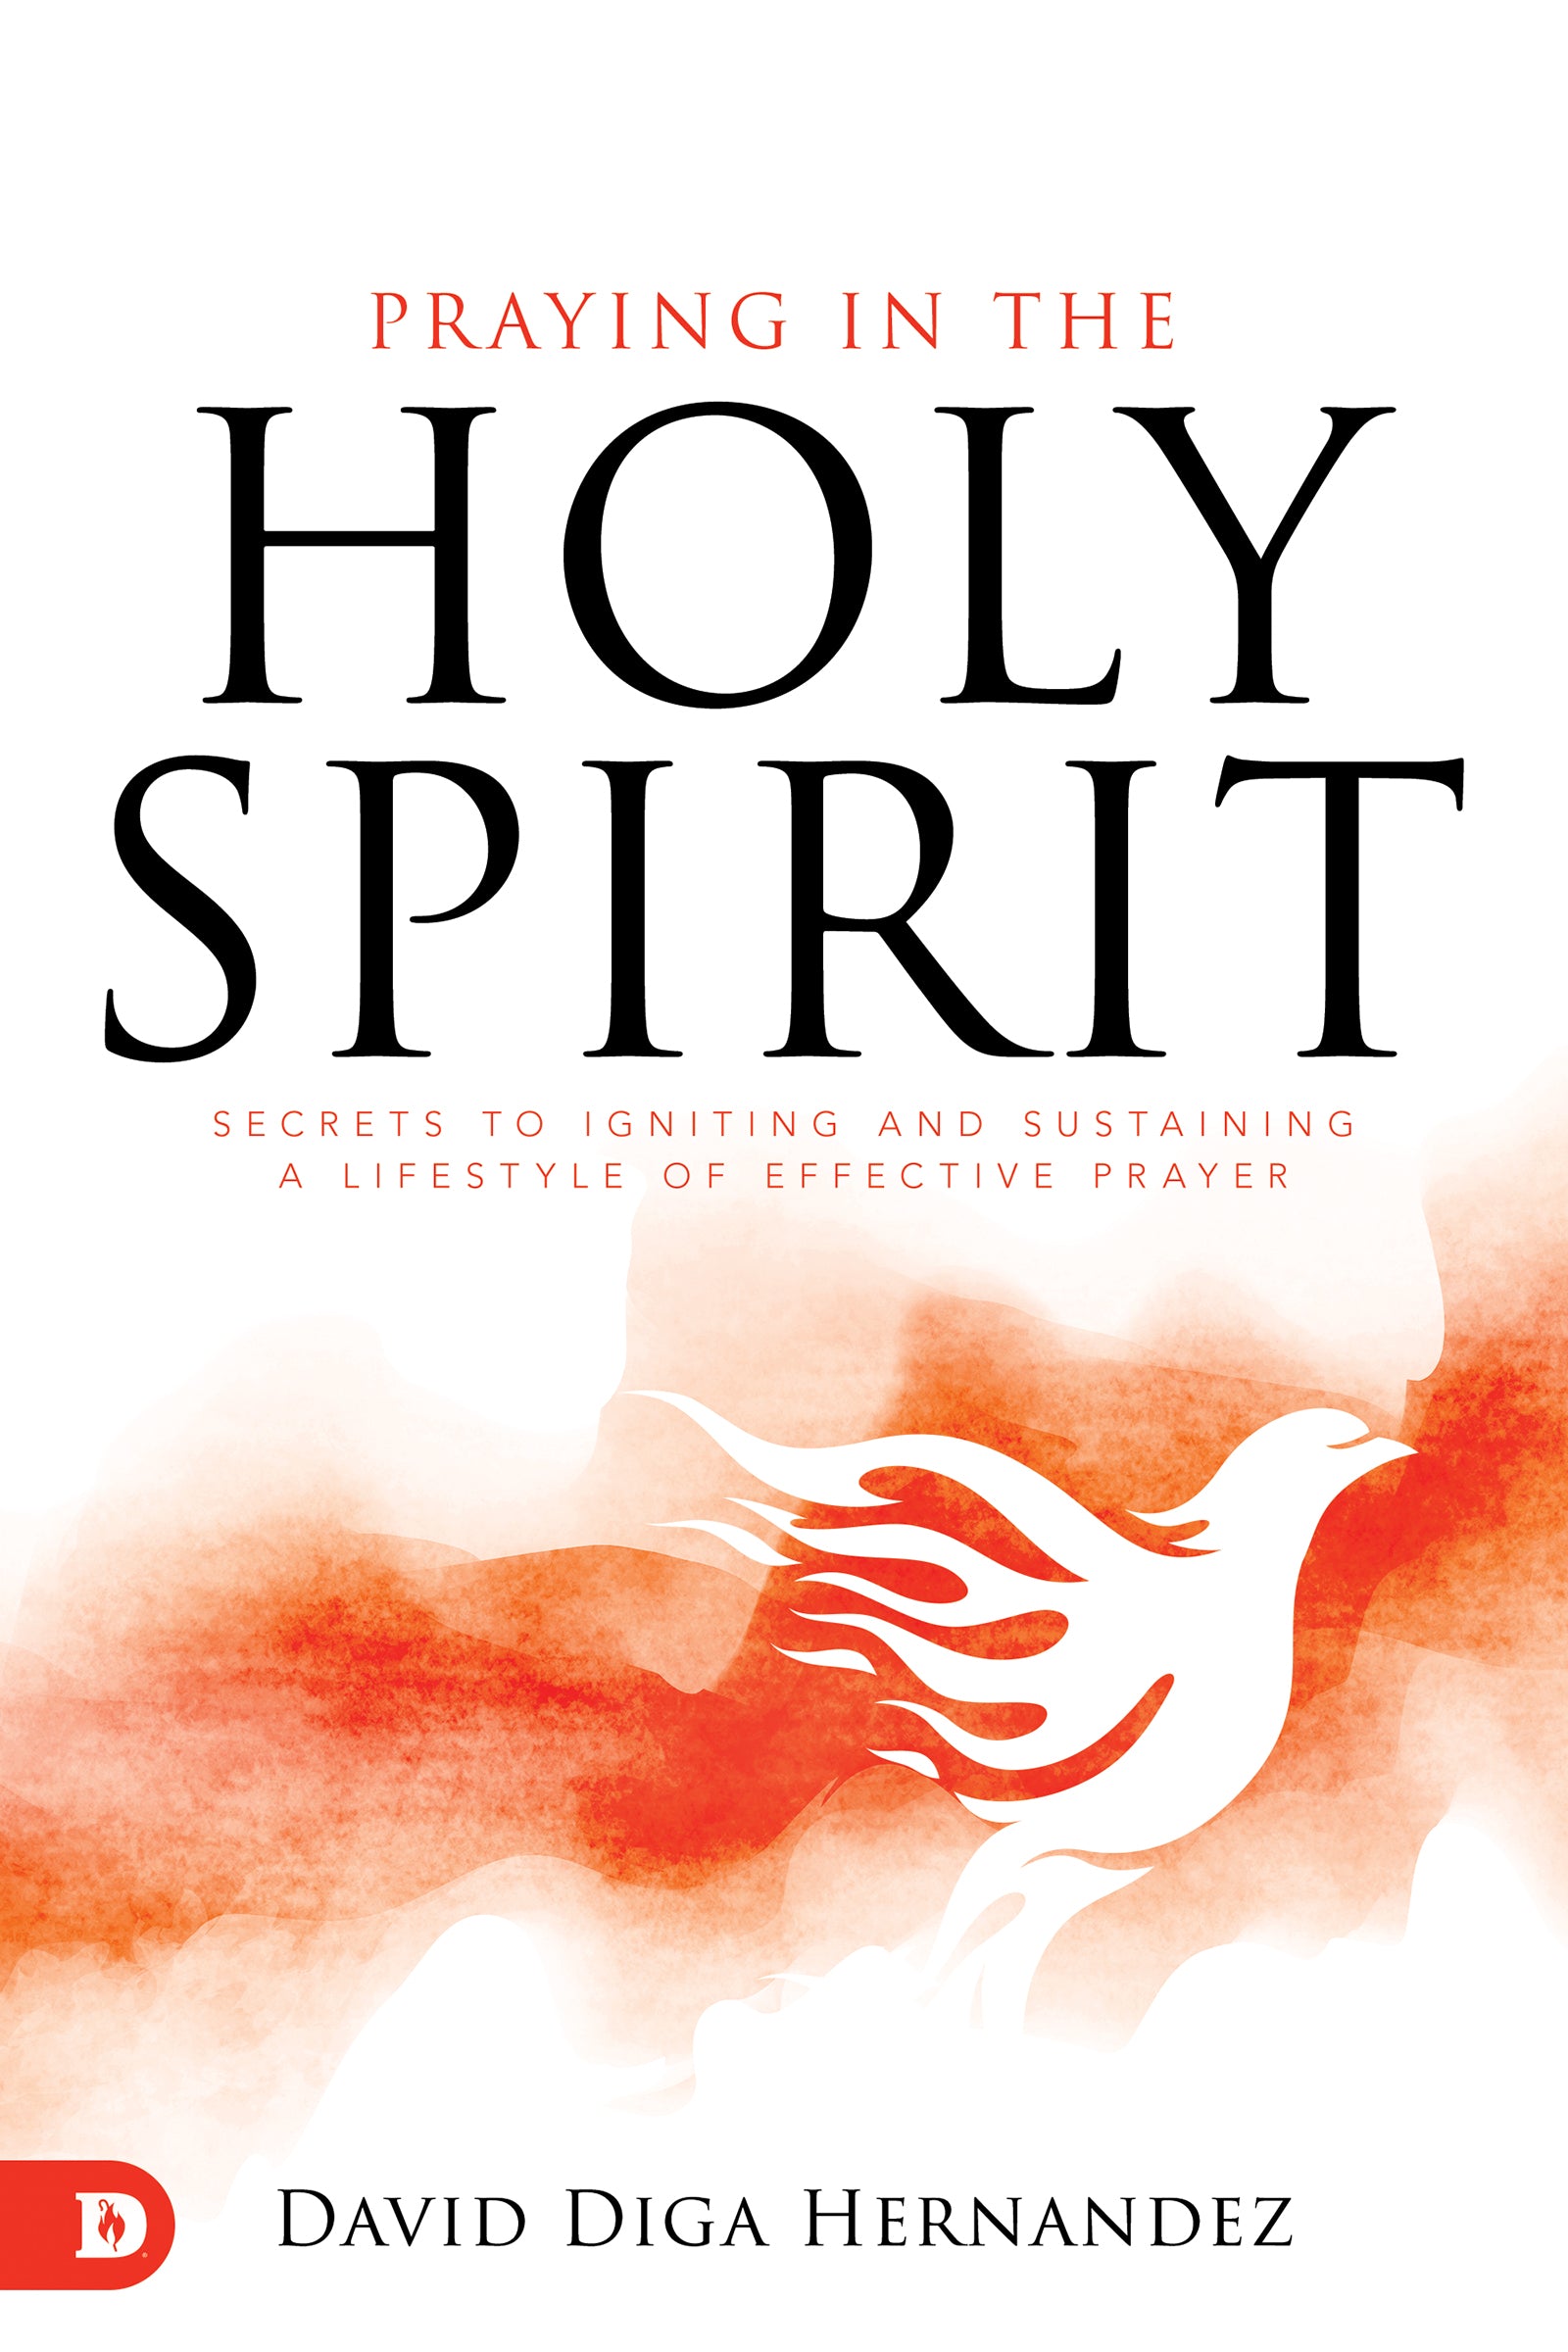 Image of Praying in the Holy Spirit other